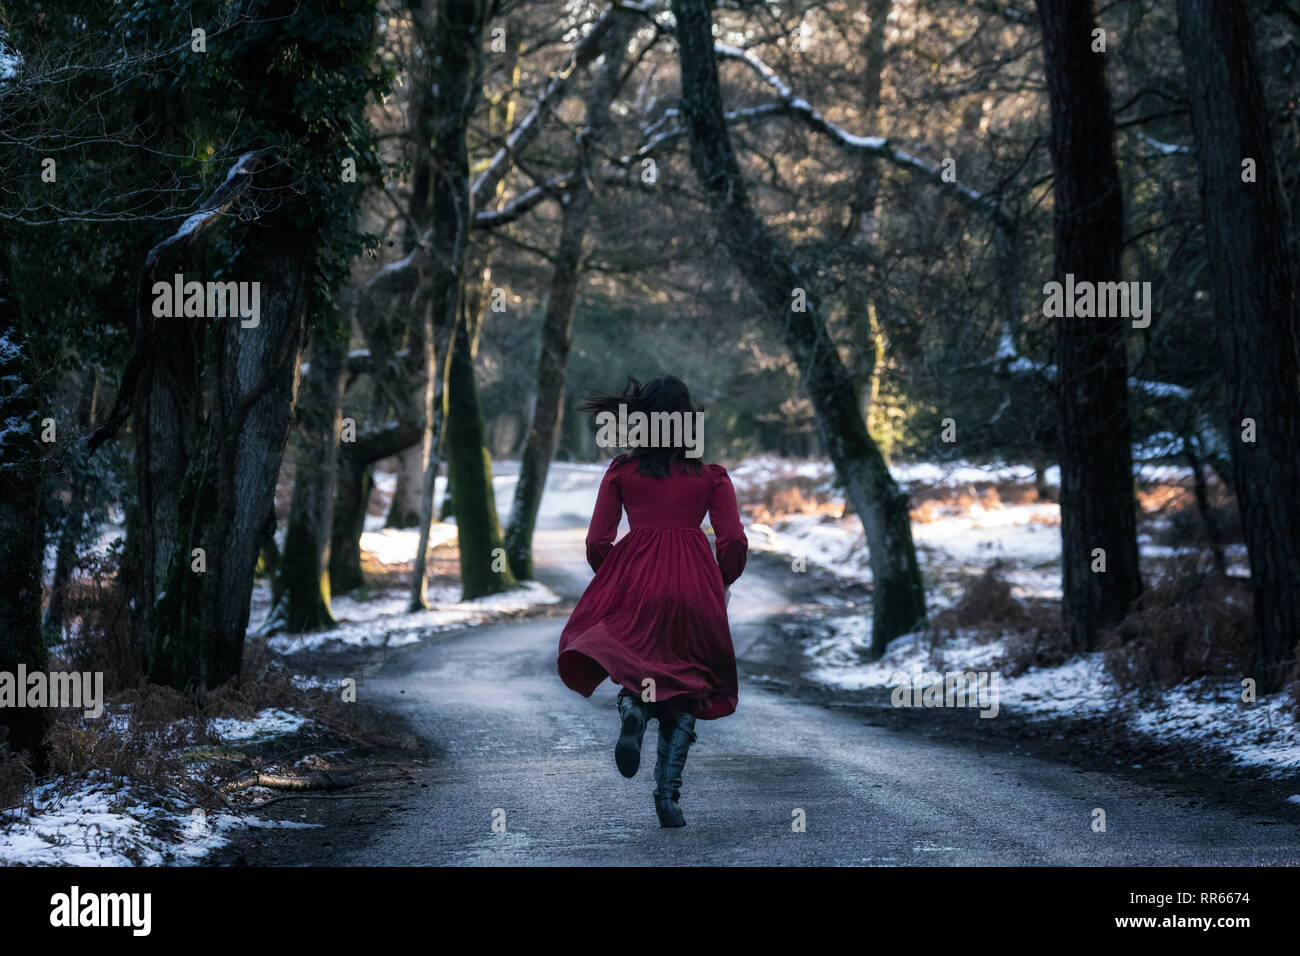 a young woman in a red dress on a small street in the middle of a wintery forest with snow Stock Photo